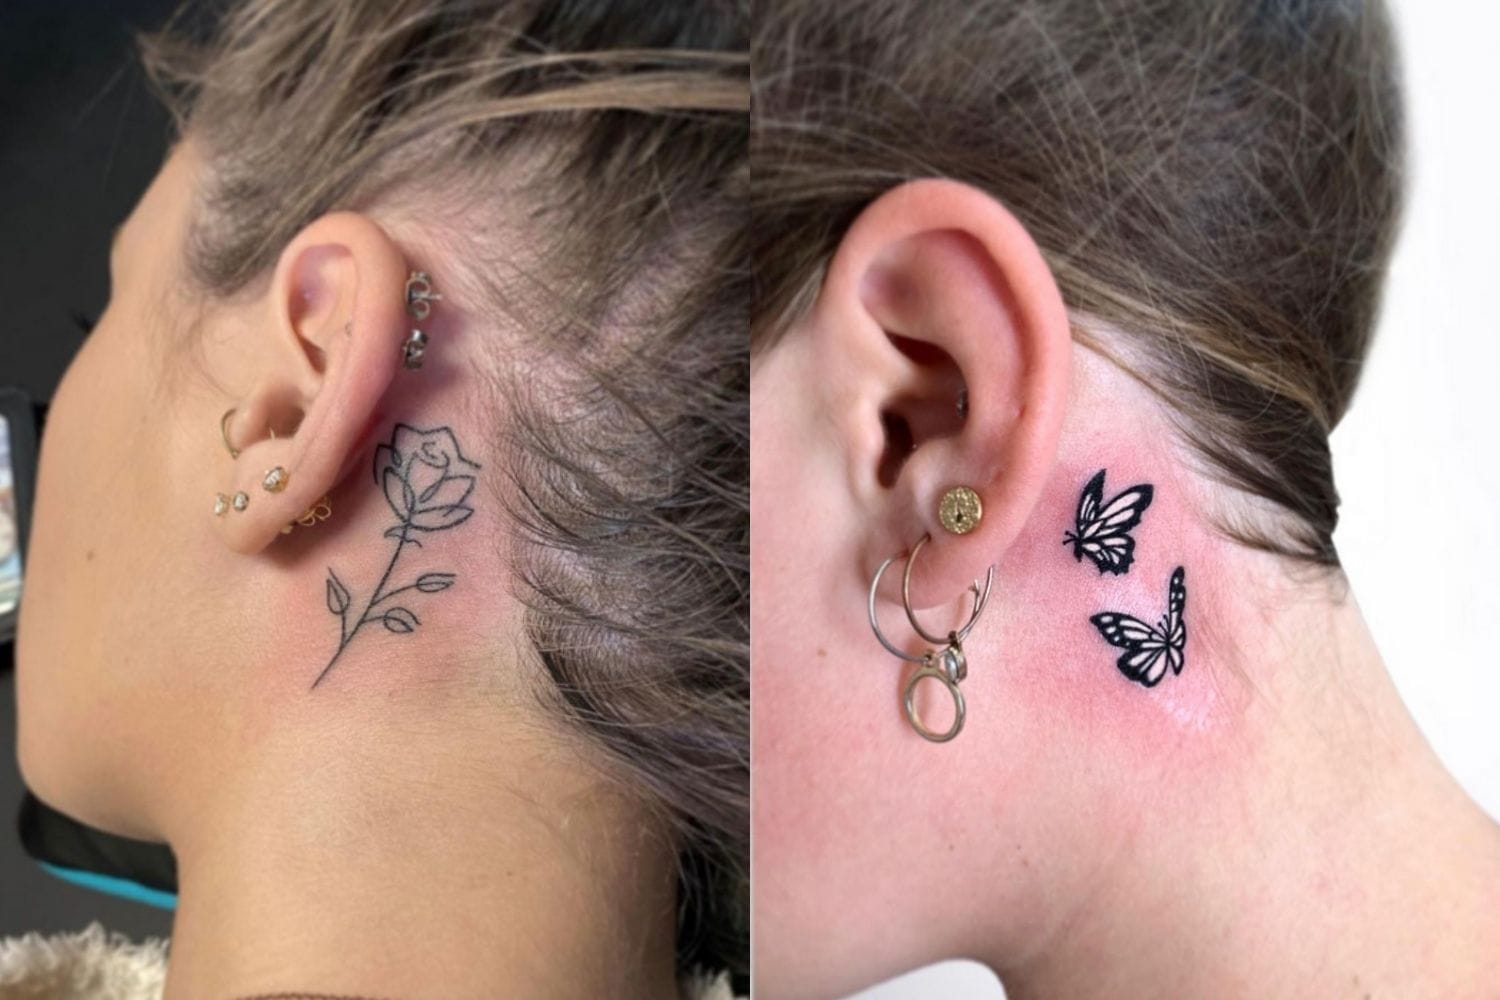 31 Tiny Ear Tattoos That Are Perfect for Minimalists | Back ear tattoo,  Rose tattoo behind ear, Small neck tattoos